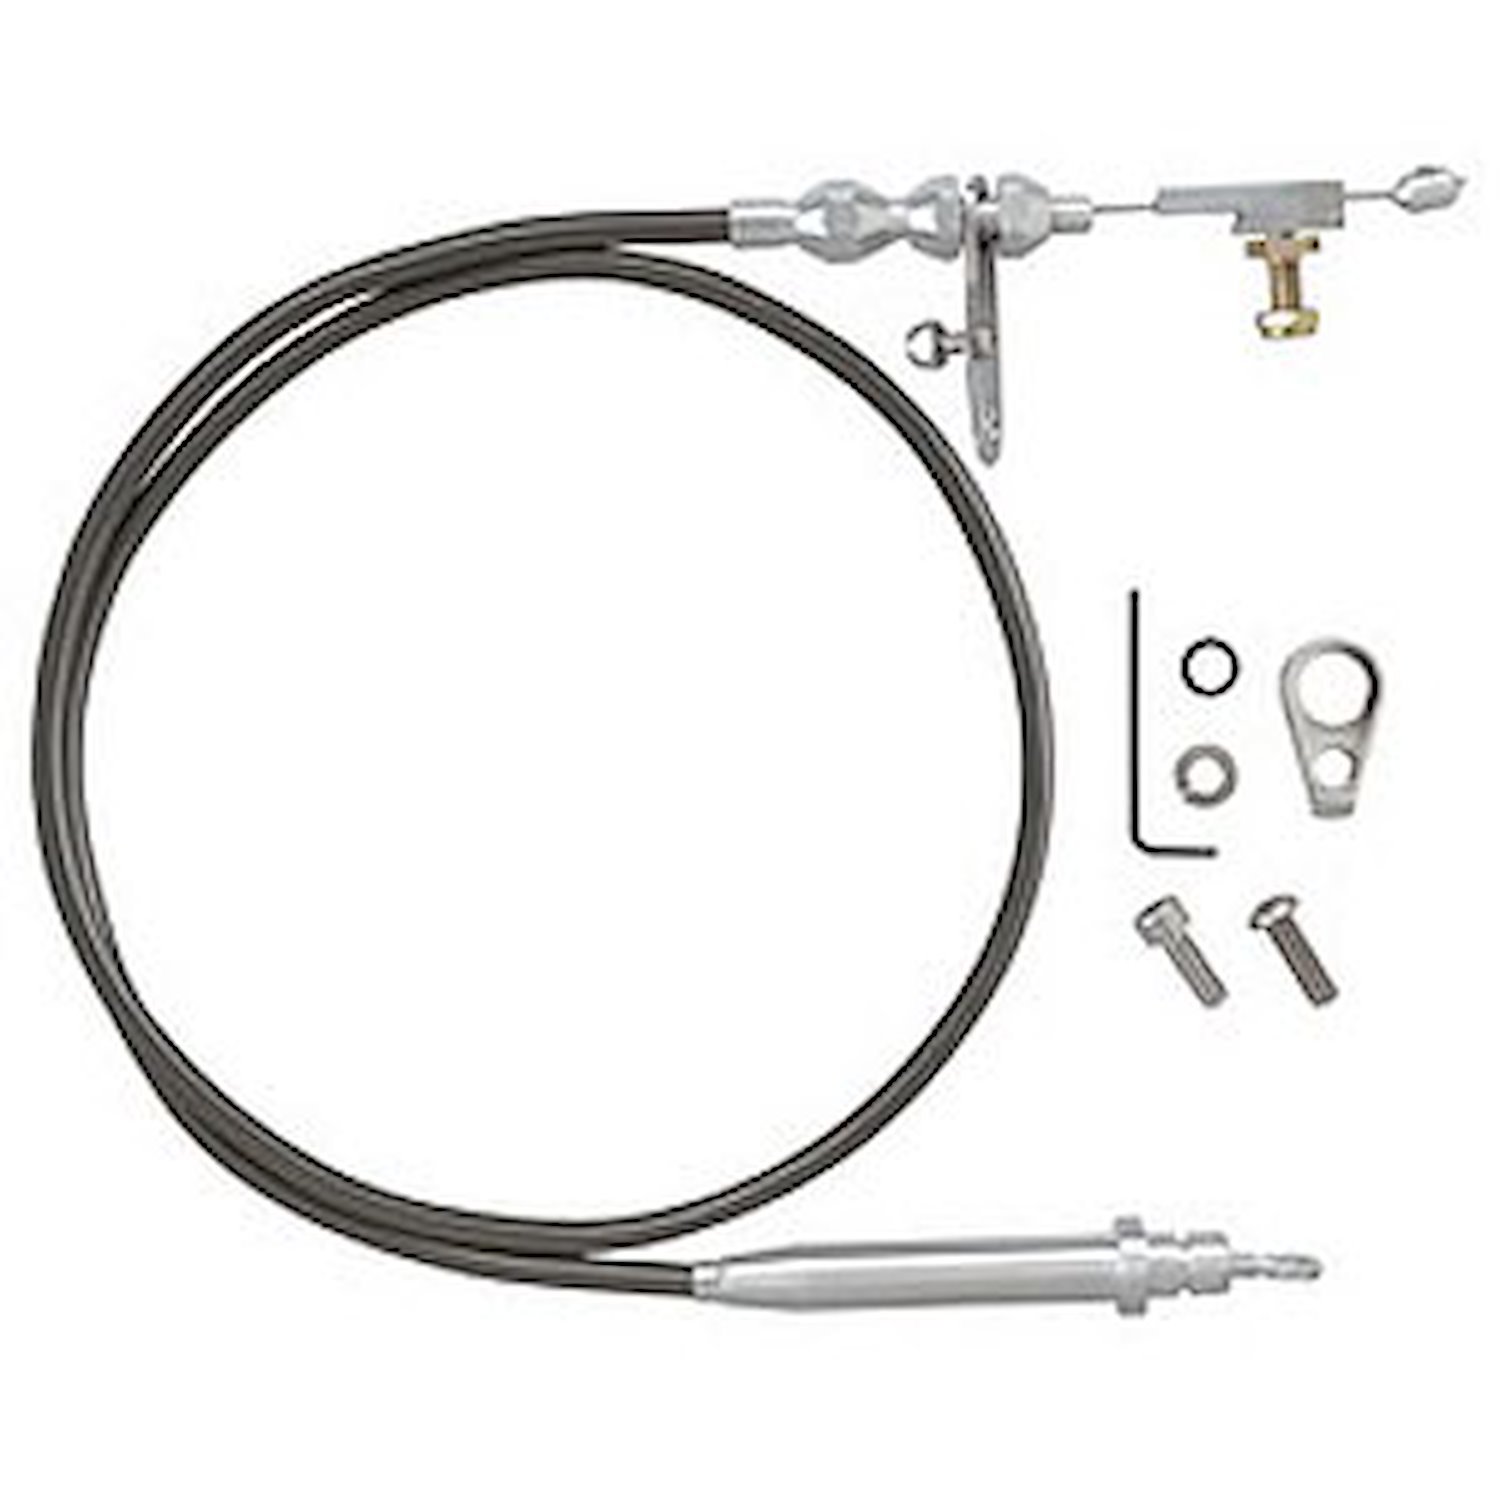 Blower Drive Hi-Tech Kickdown Cable For Ford C-6